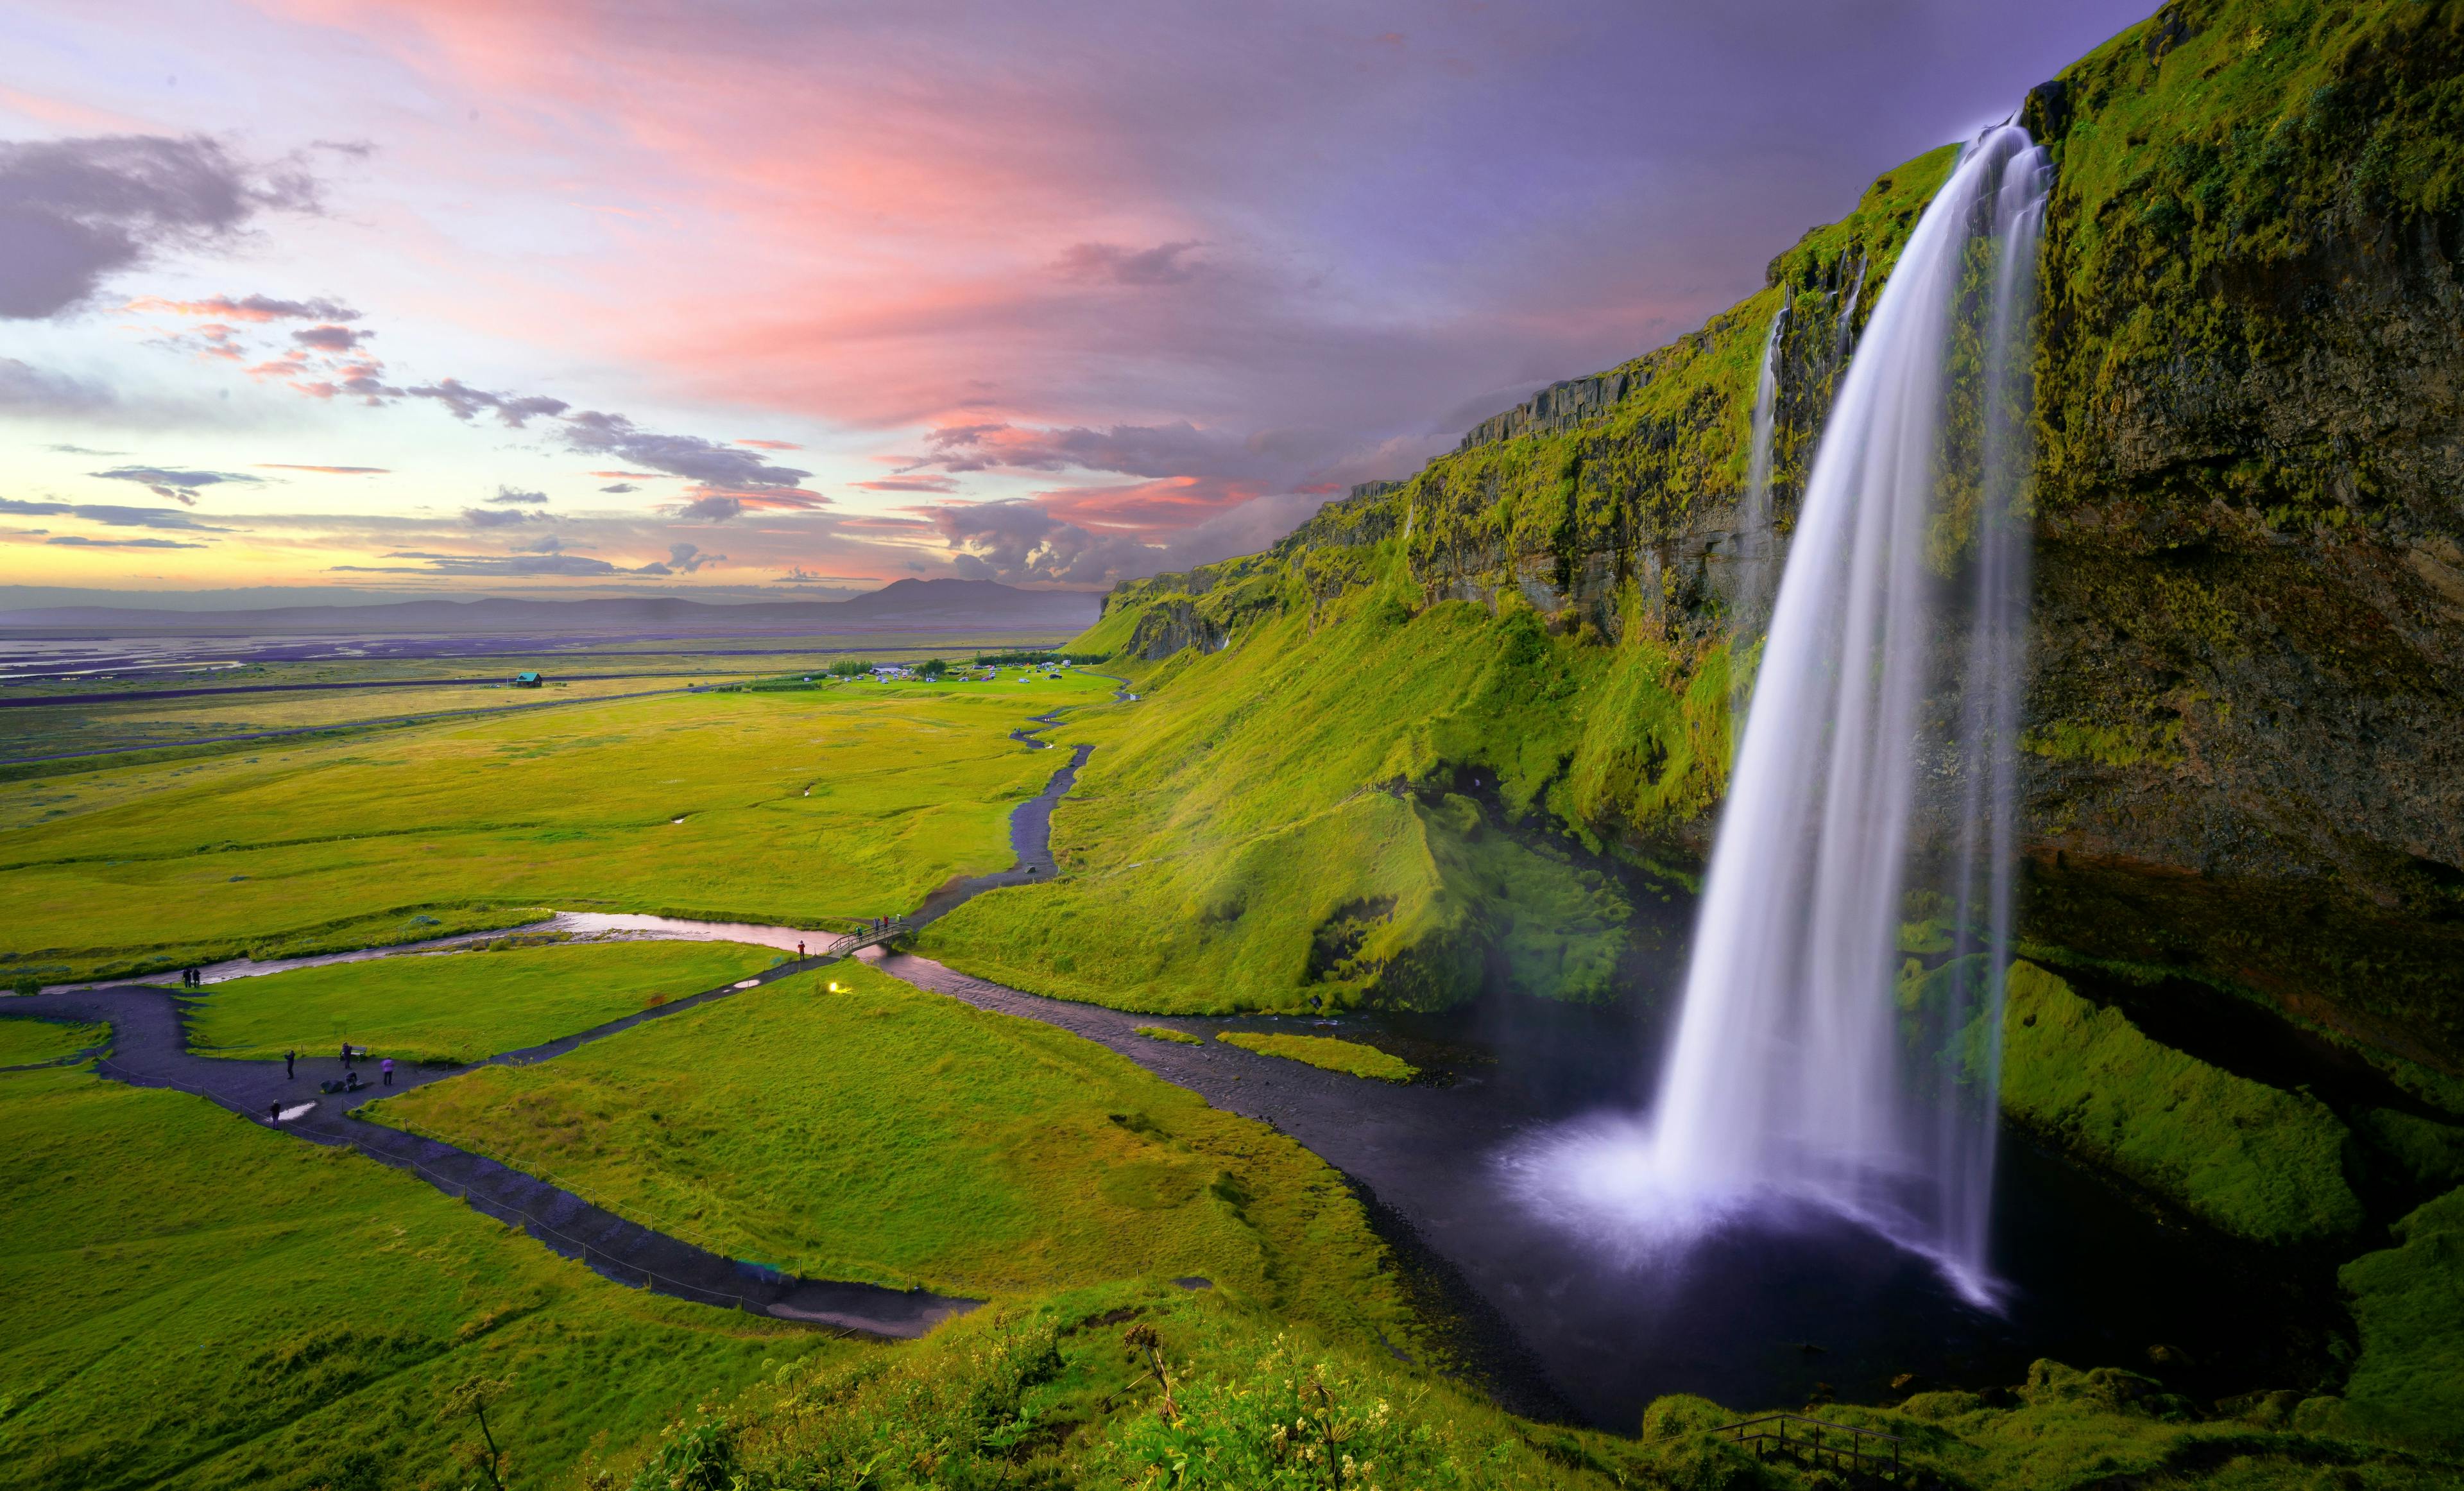 Waterfall and scenic landscape in Iceland